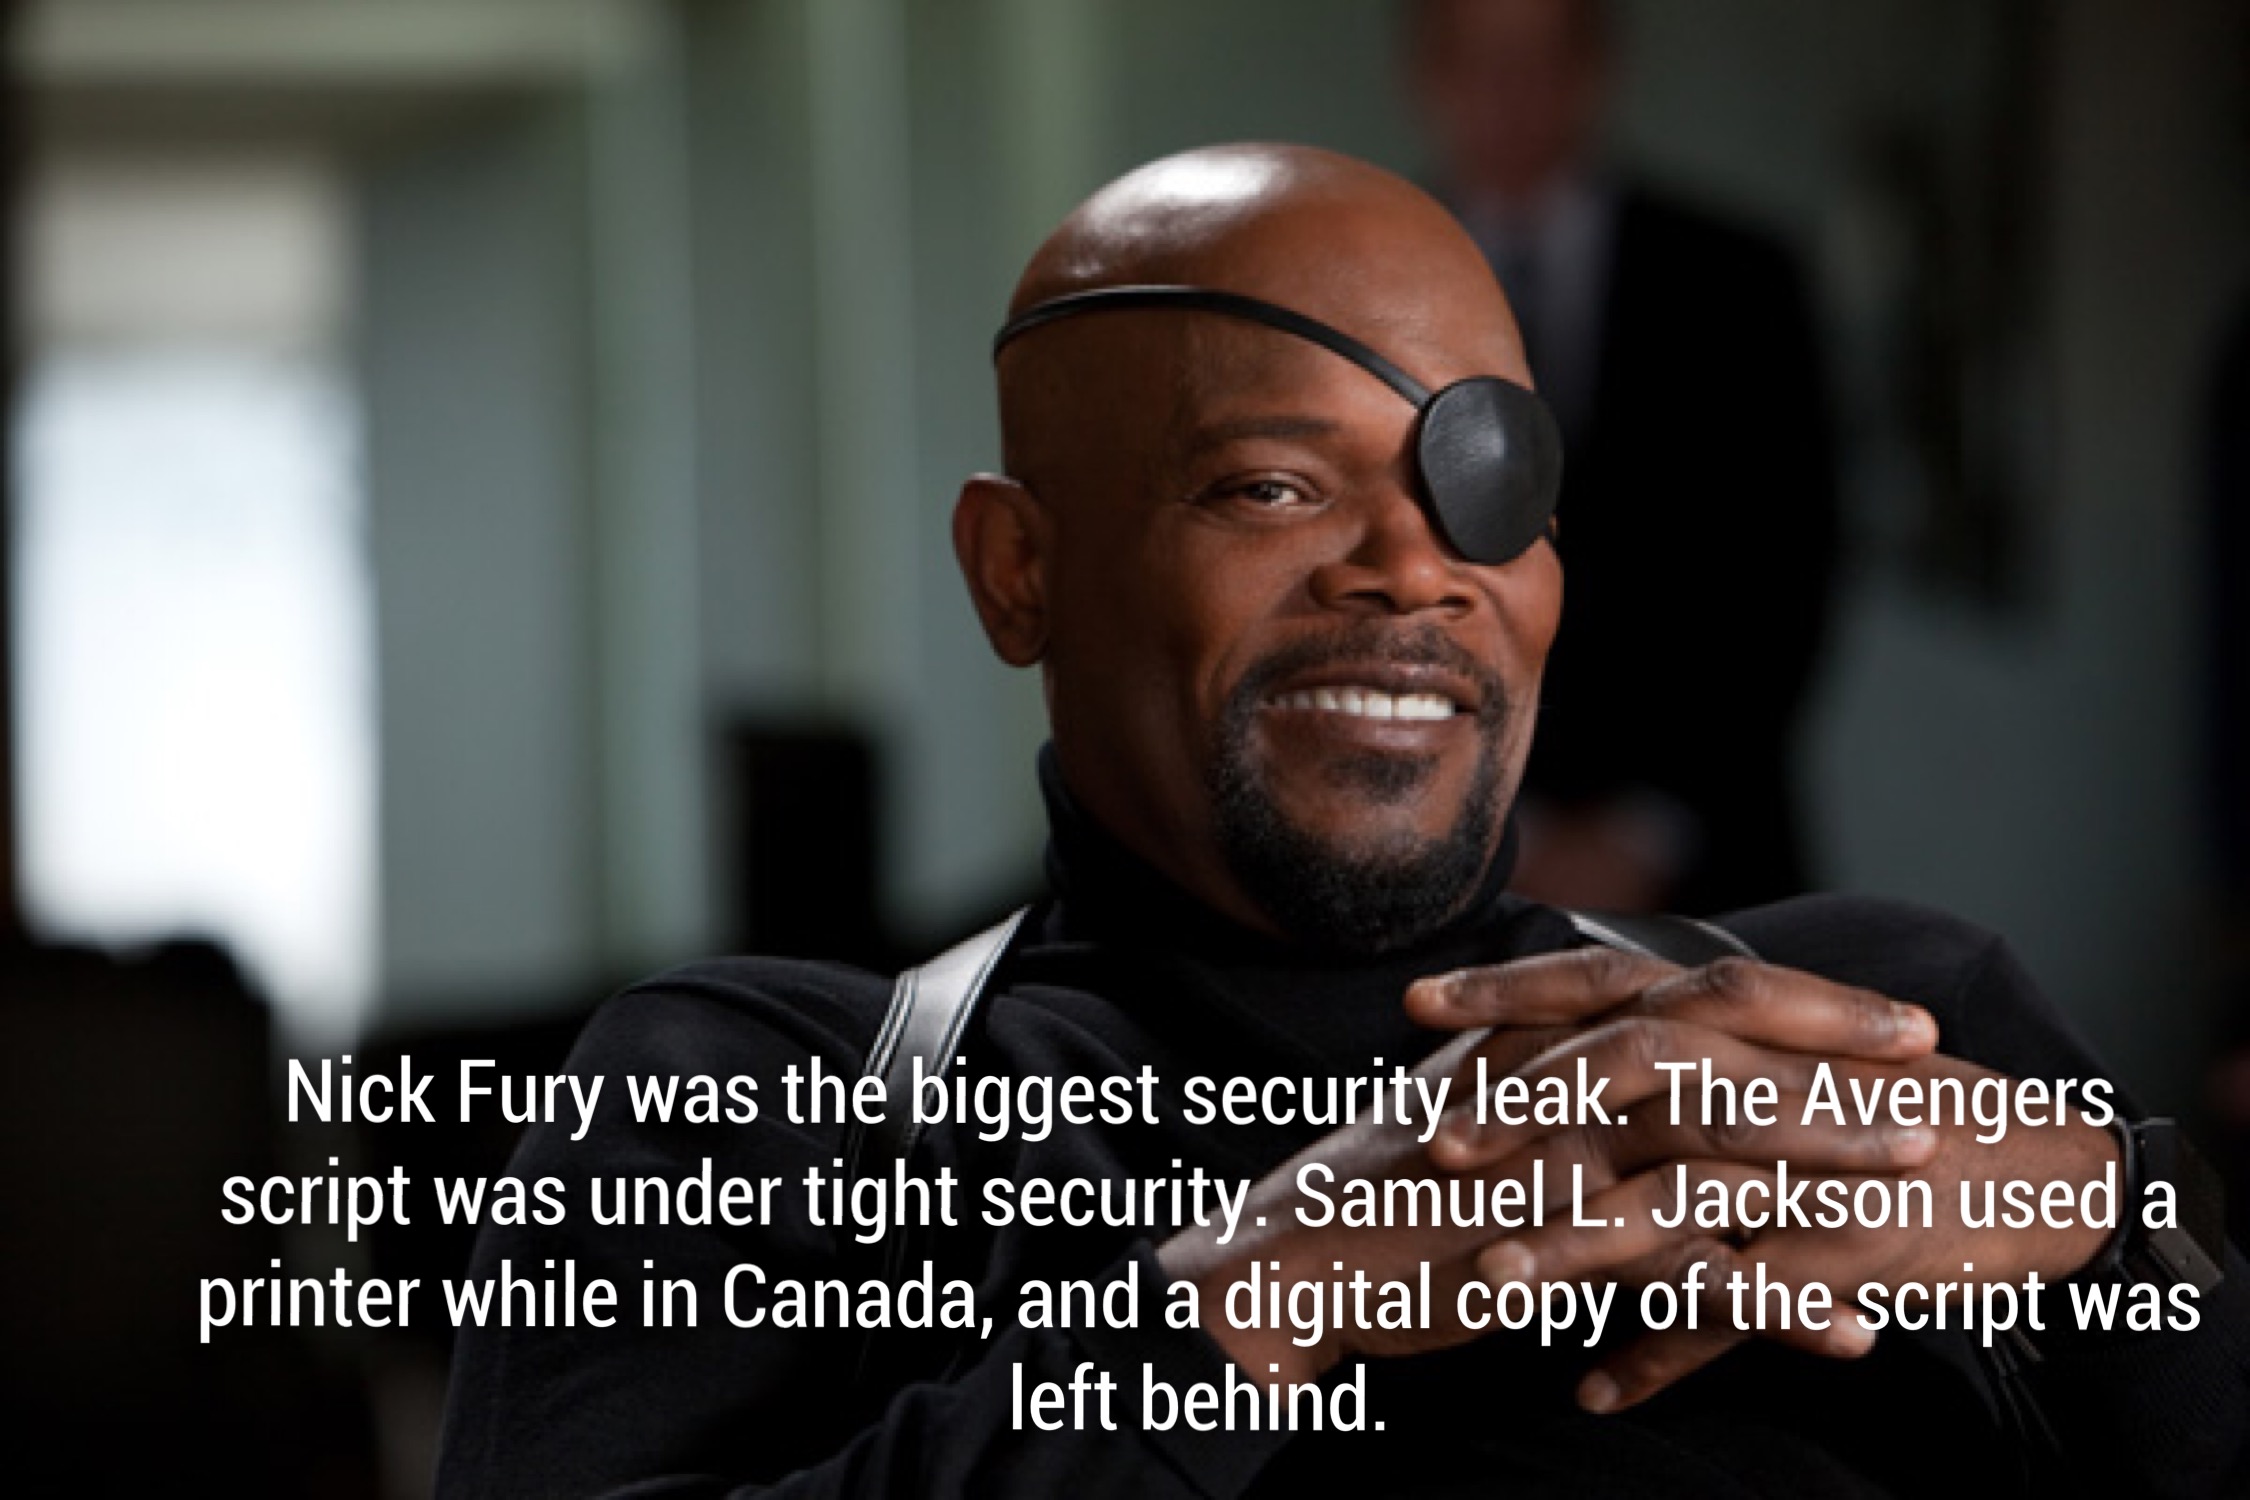 nick fury samuel jackson - Nick Fury was the biggest security leak. The Avengers script was under tight security. Samuel L. Jackson used a printer while in Canada, and a digital copy of the script was left behind.